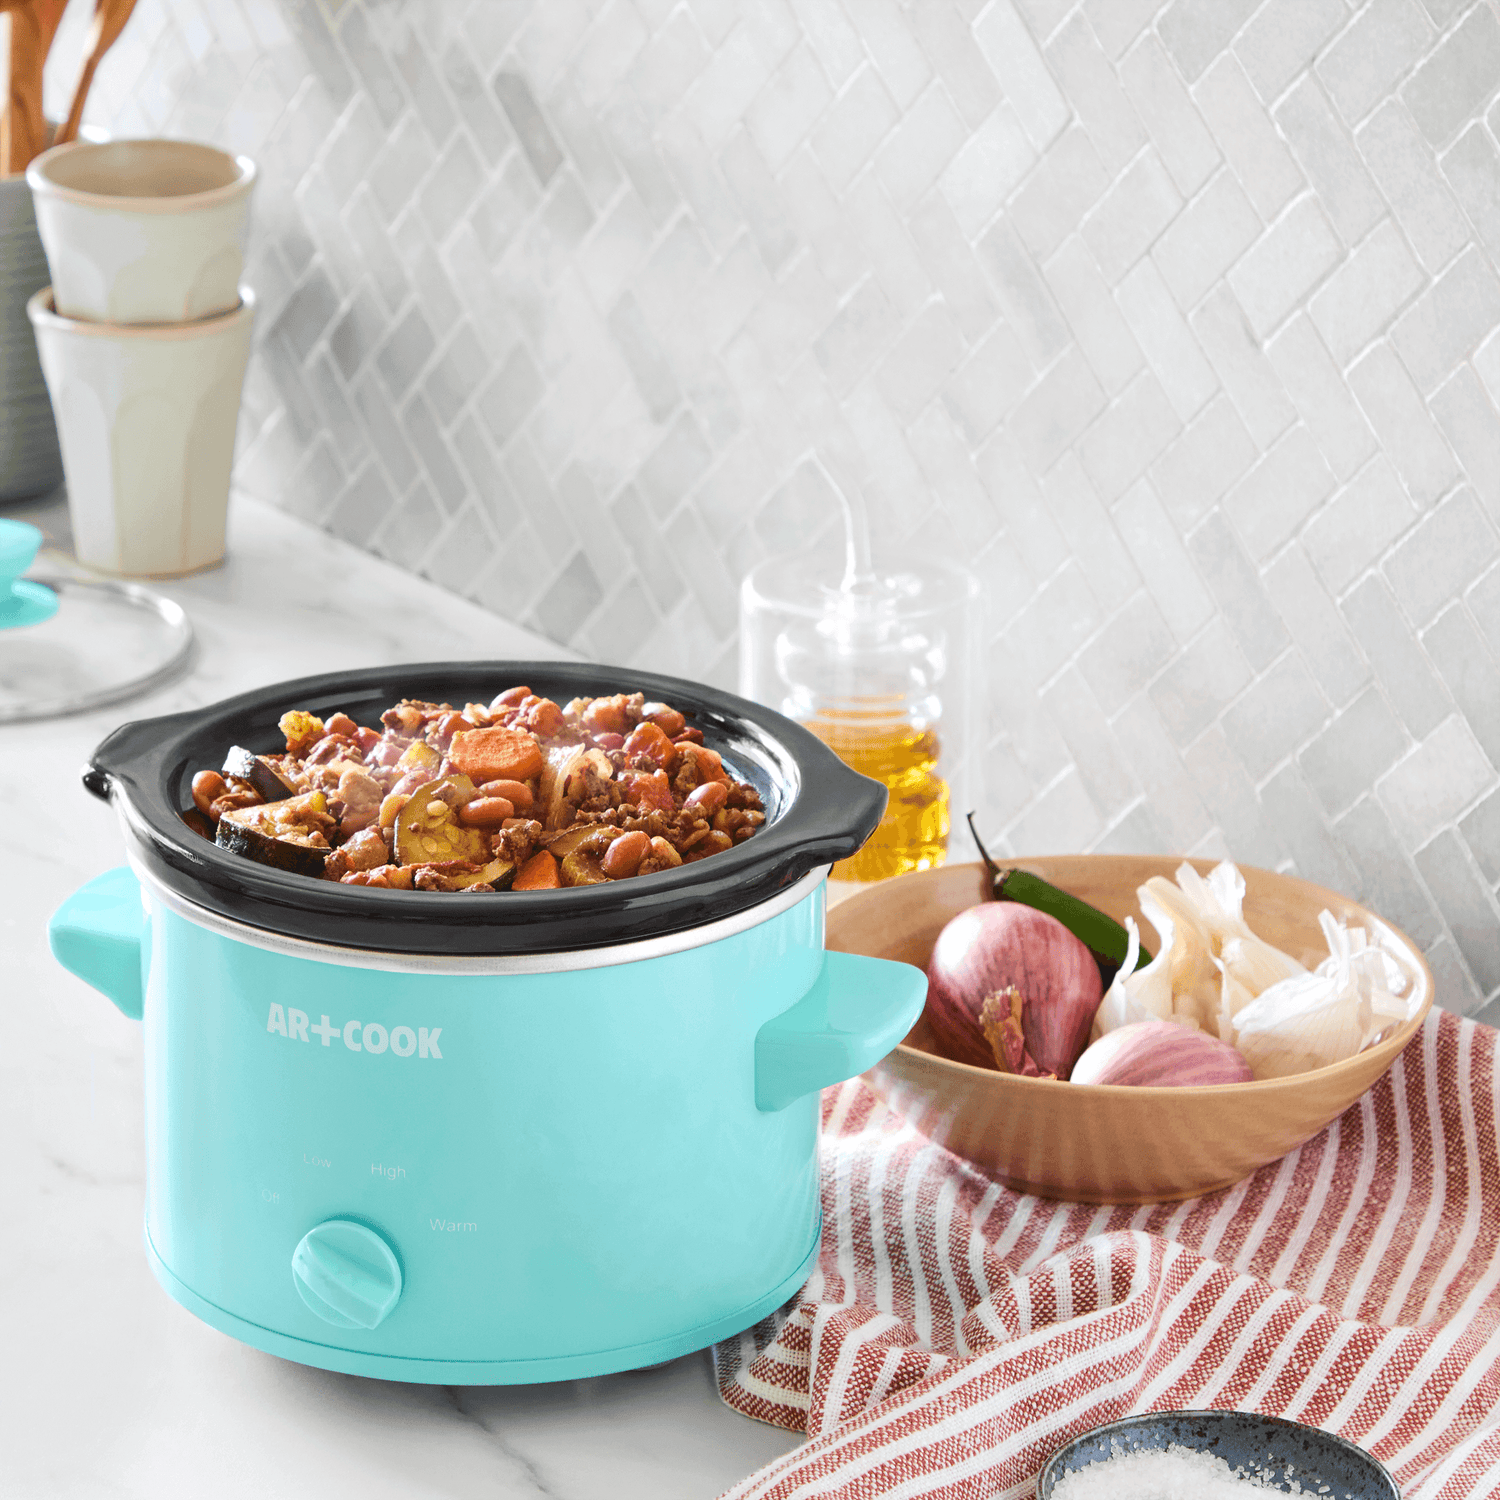 KOOC - Small Slow Cooker - 2 Quart, Pink, with Free Liners